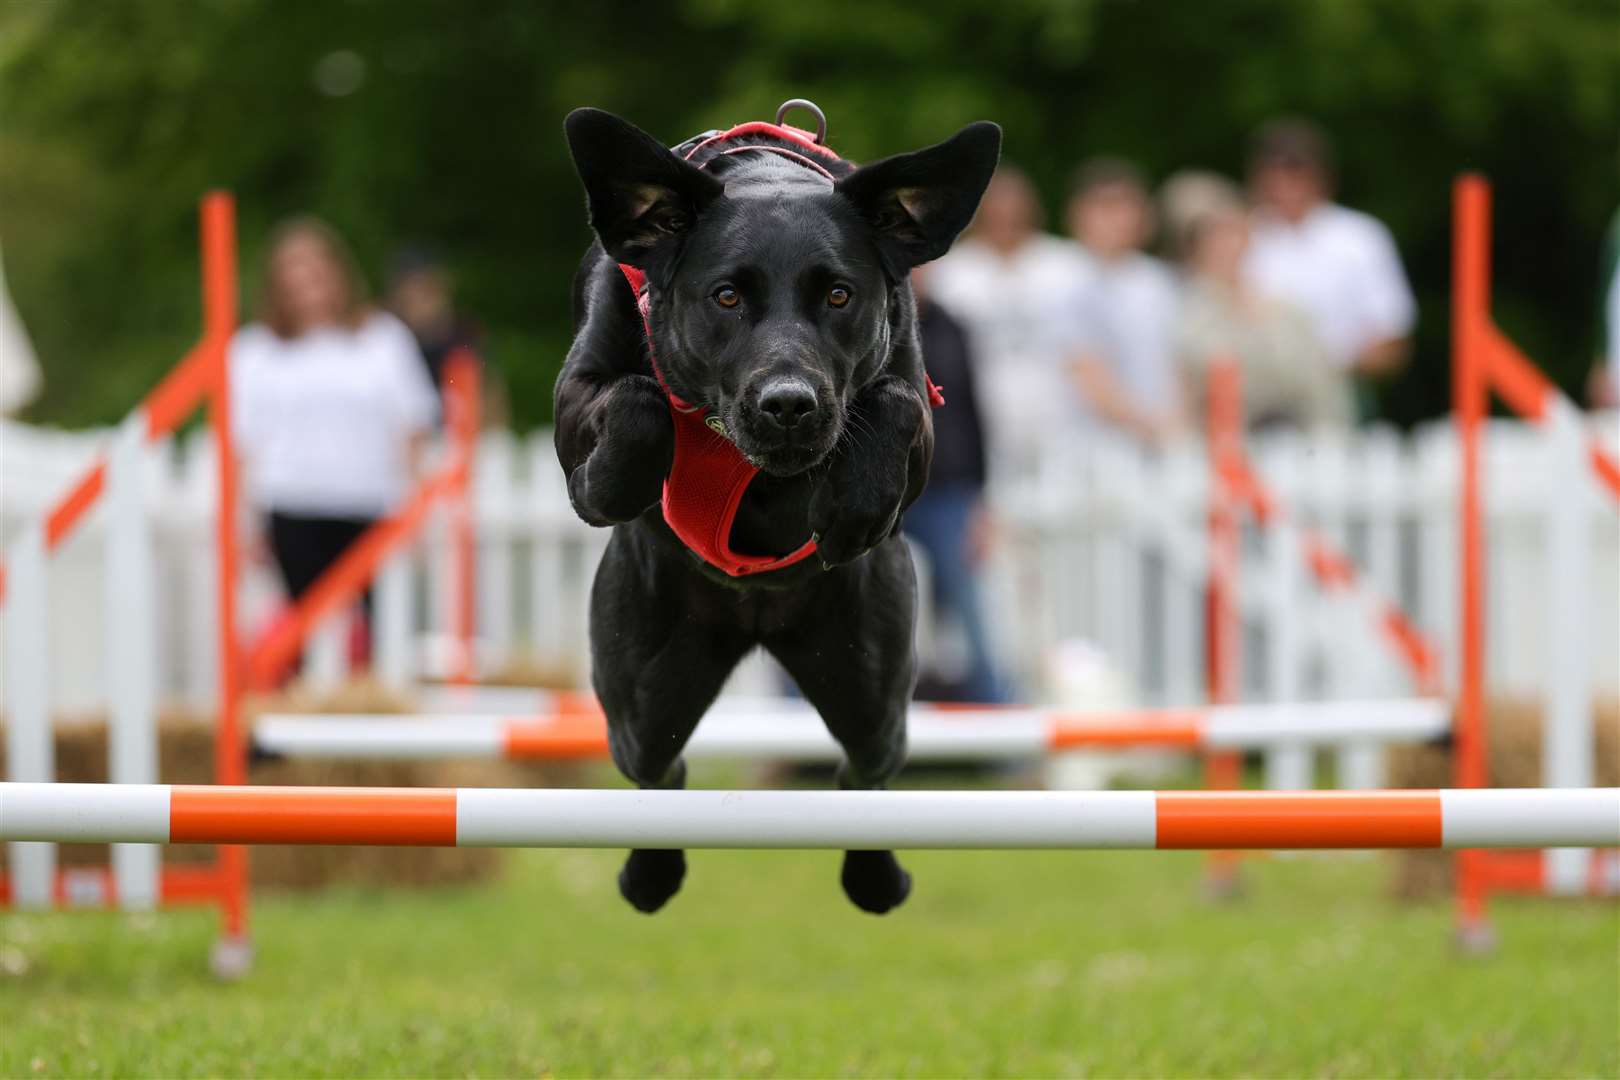 Some dogs could not wait to show off their skills on an obstacle course (Ben Whitley Media Assignments/PA)